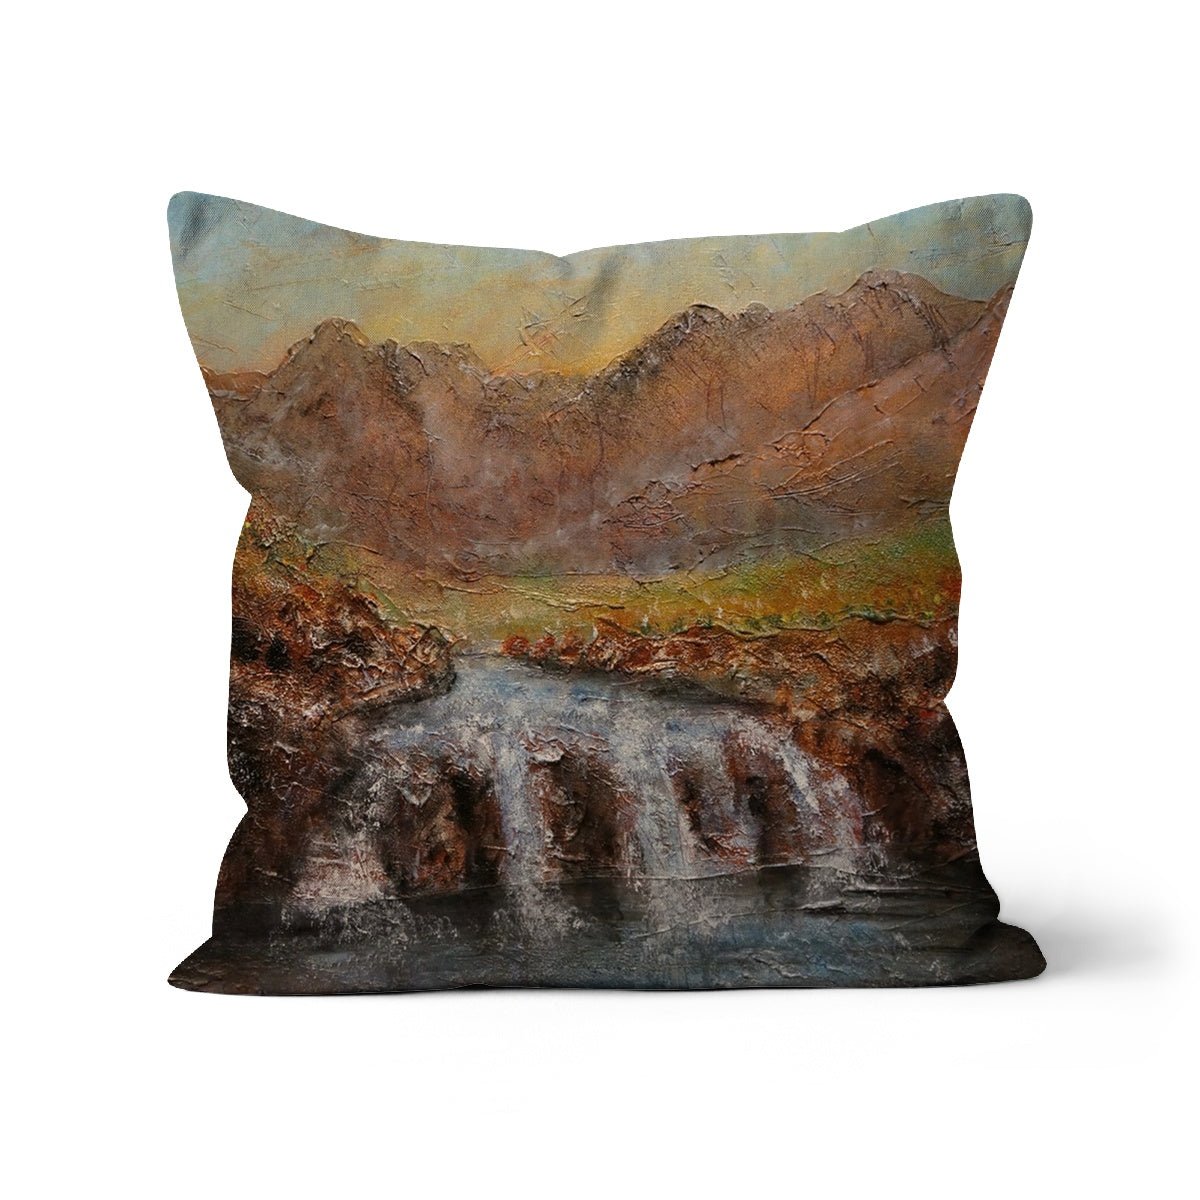 Fairy Pools Dawn Skye Art Gifts Cushion-Cushions-Skye Art Gallery-Canvas-24"x24"-Paintings, Prints, Homeware, Art Gifts From Scotland By Scottish Artist Kevin Hunter